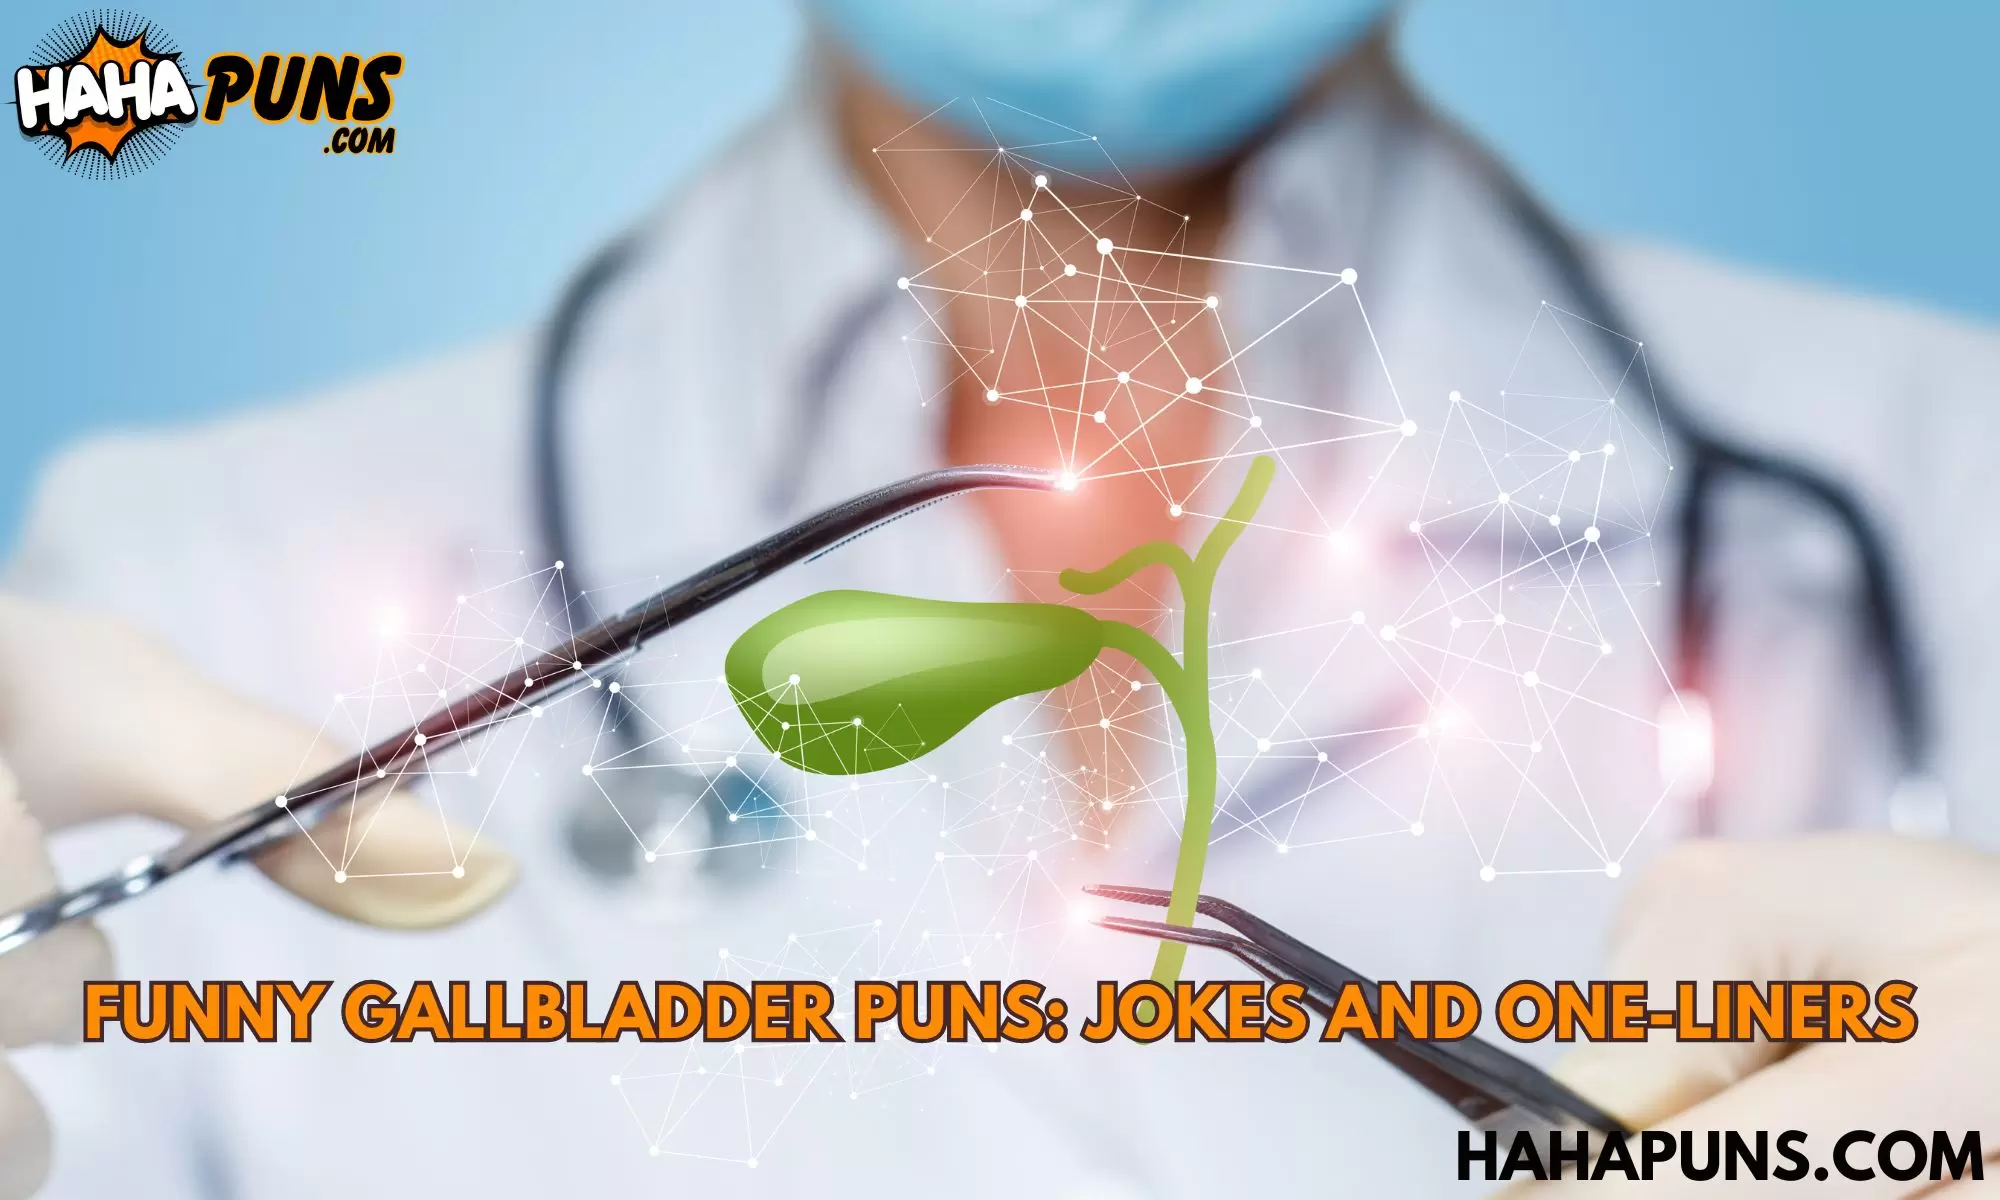 Funny Gallbladder Puns: Jokes And One-Liners